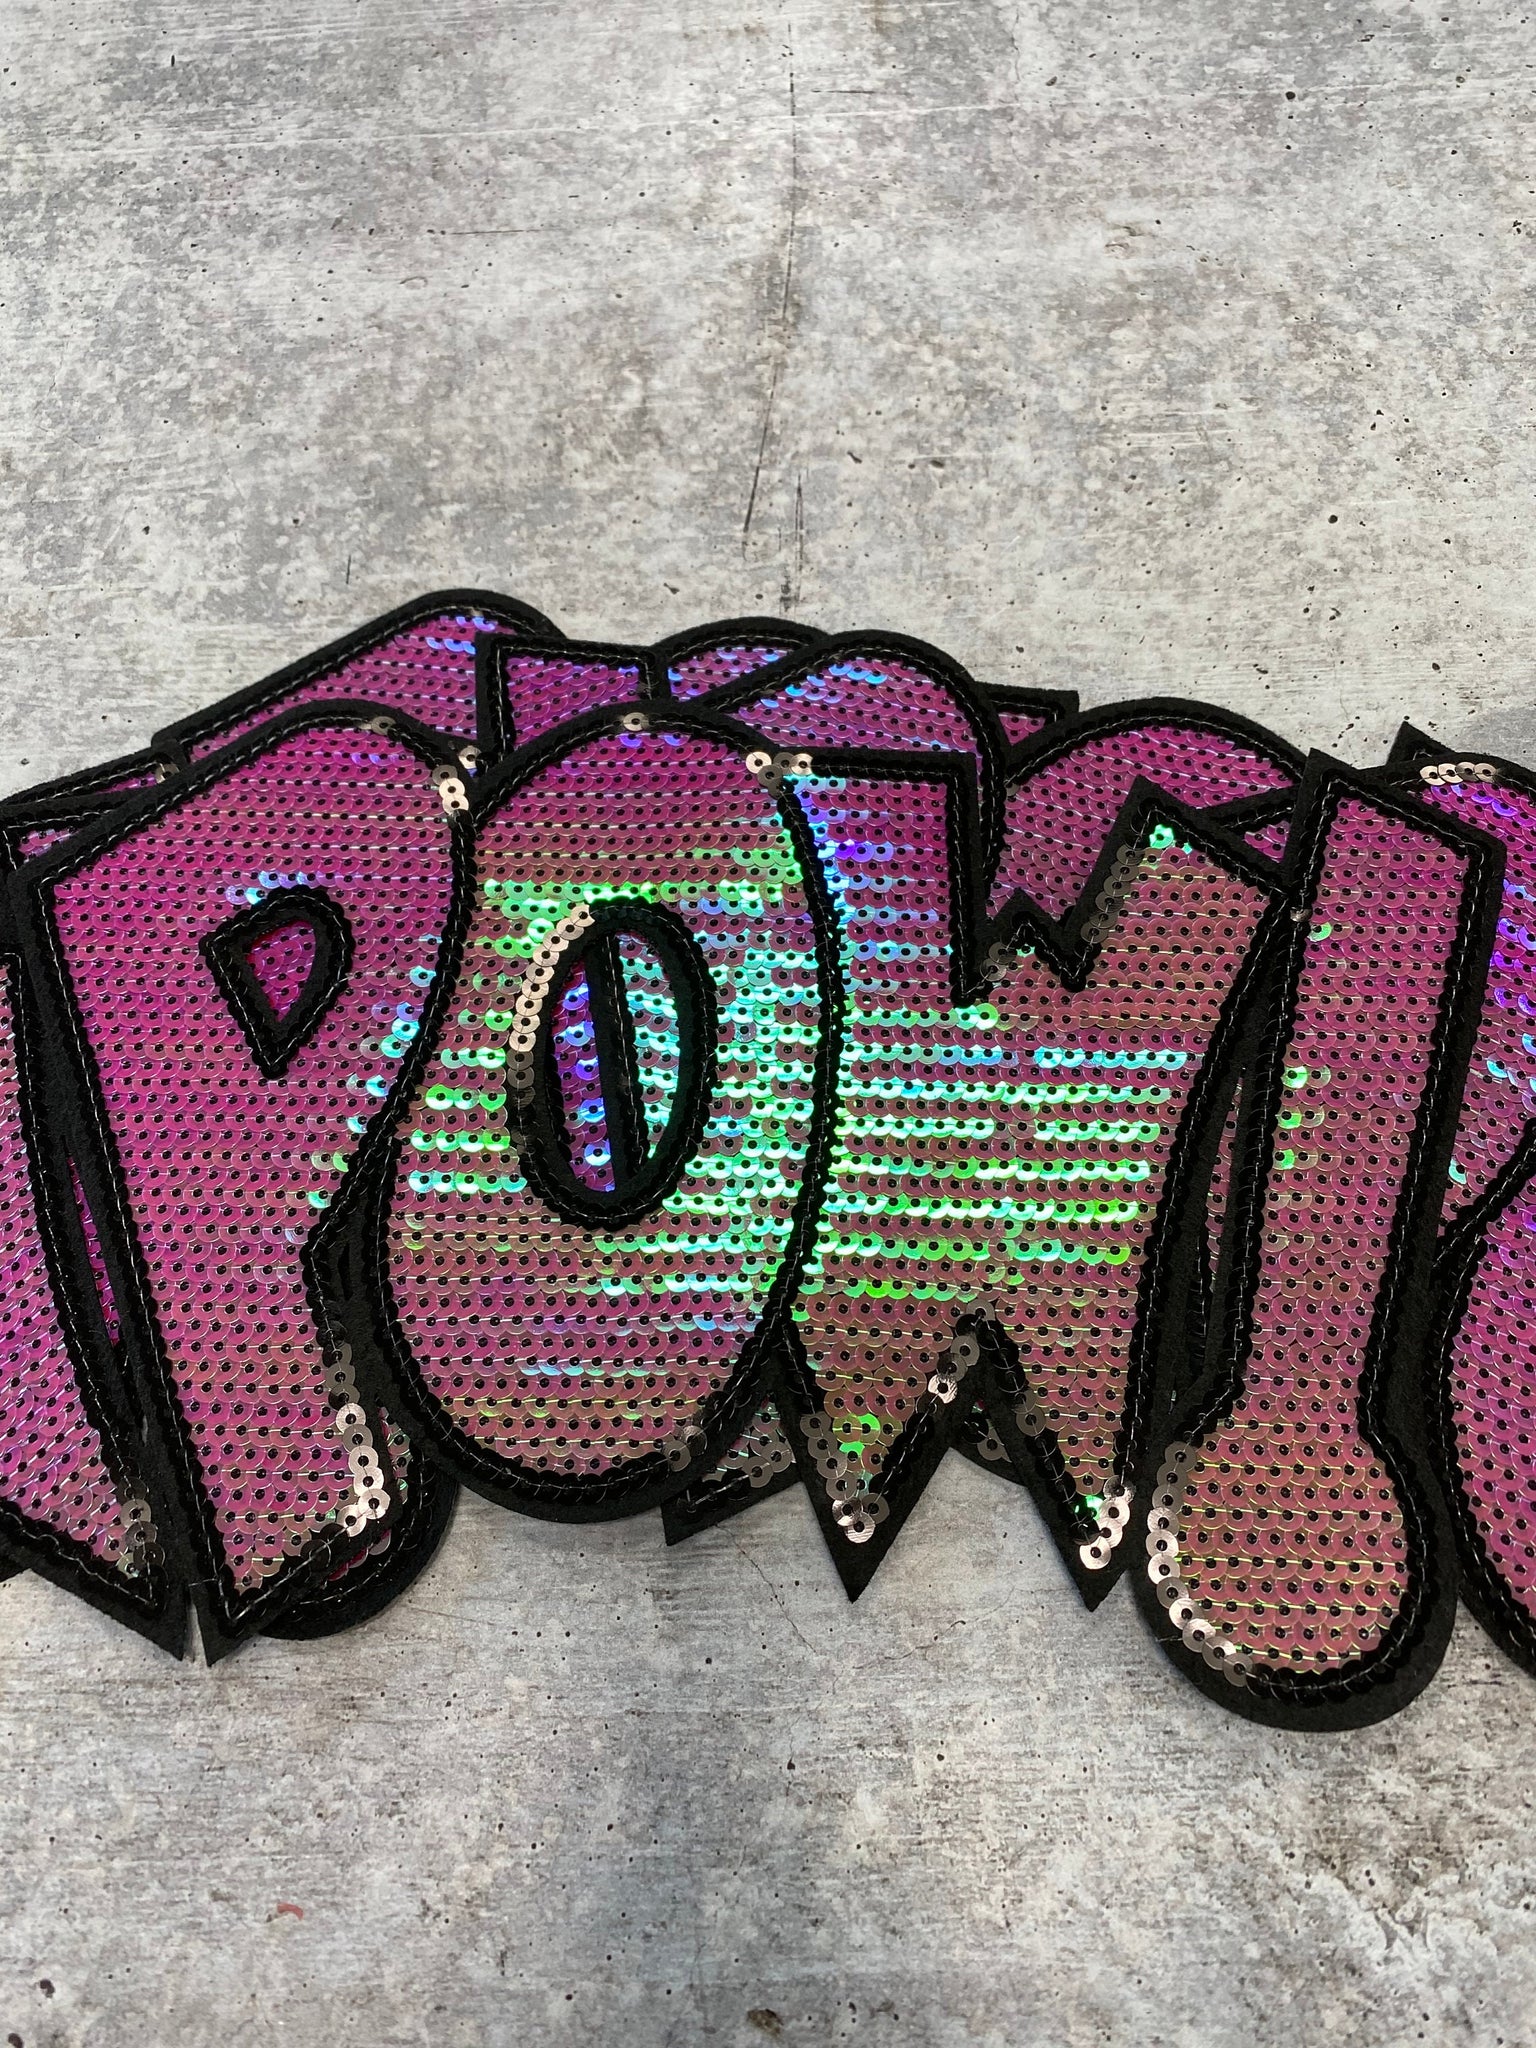 NEW, Sequins "POW!"  SEQUINS Patch, Adorable Emblem, Home Girls Statement Patch, Iron-on Embroidered Applique, Size 9.5", Jacket Patch